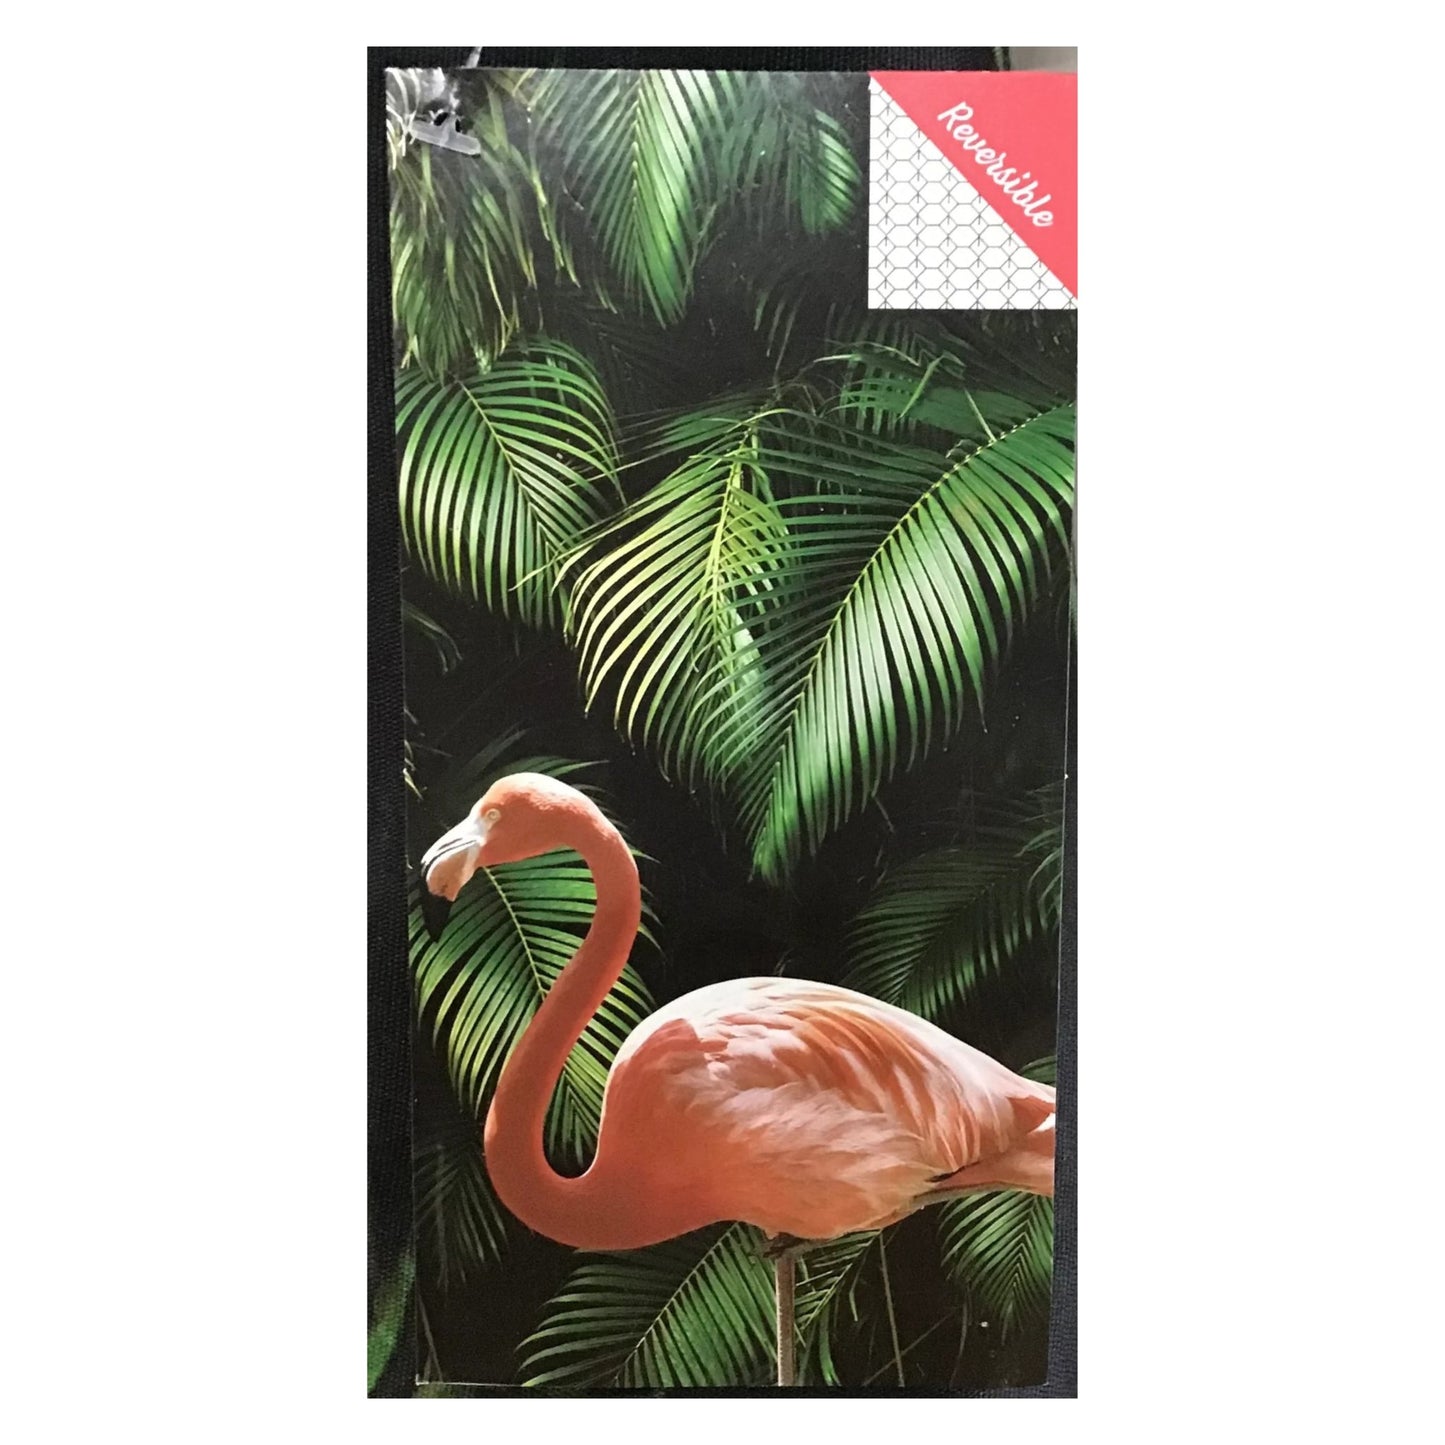 Whitley Willows-Whitley Willows Microfiber Beach Towels- 35 x70 - Comapact, Lighweight, Quick Dry, Extra Absorbent, Super Soft - Good for Beach, Pool, Yoga, Travel and Camping (Flamingo) - Brandat Outlet